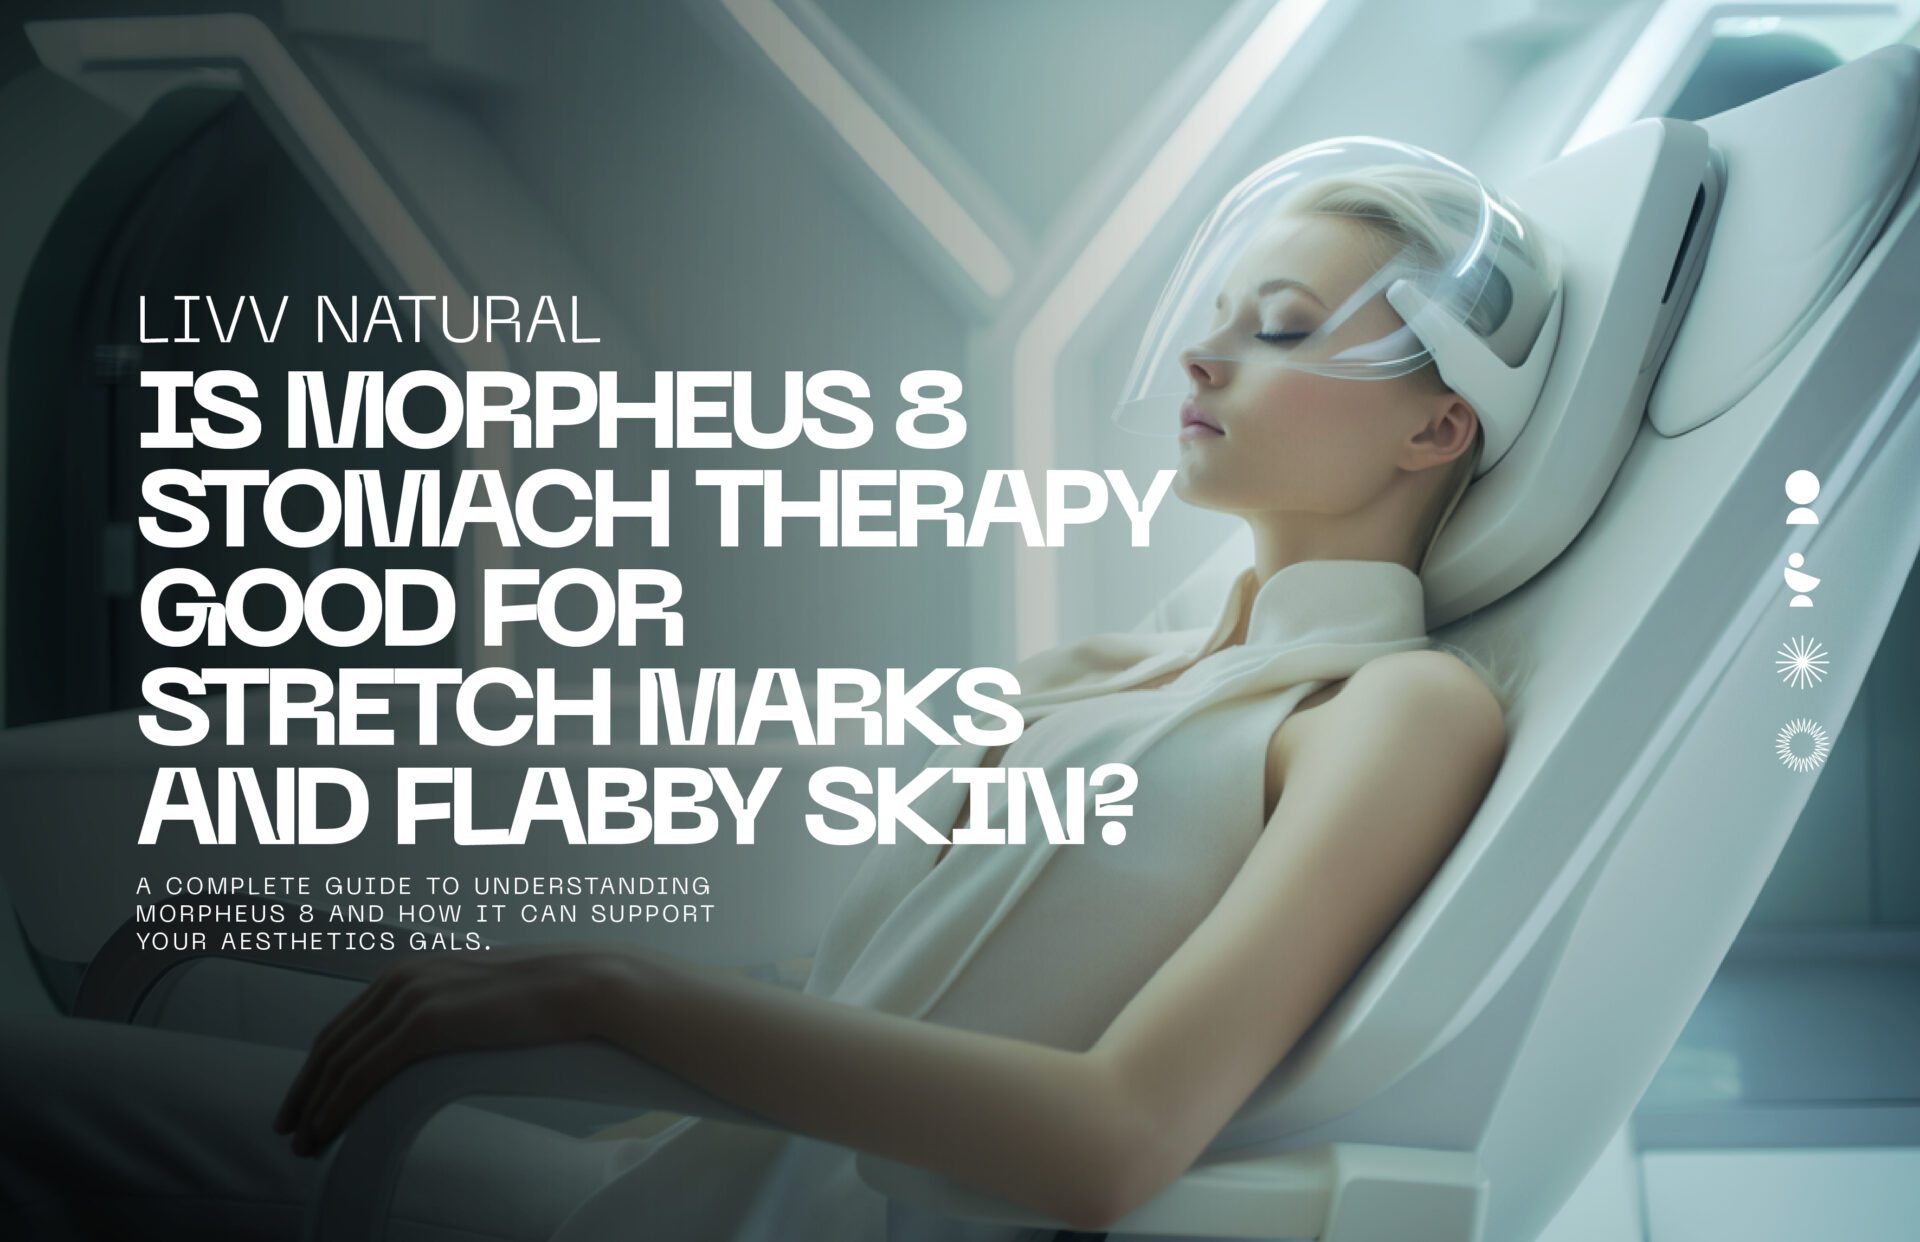 Is morpheus 8 stomach therapy good for stretch marks and flabby skin?